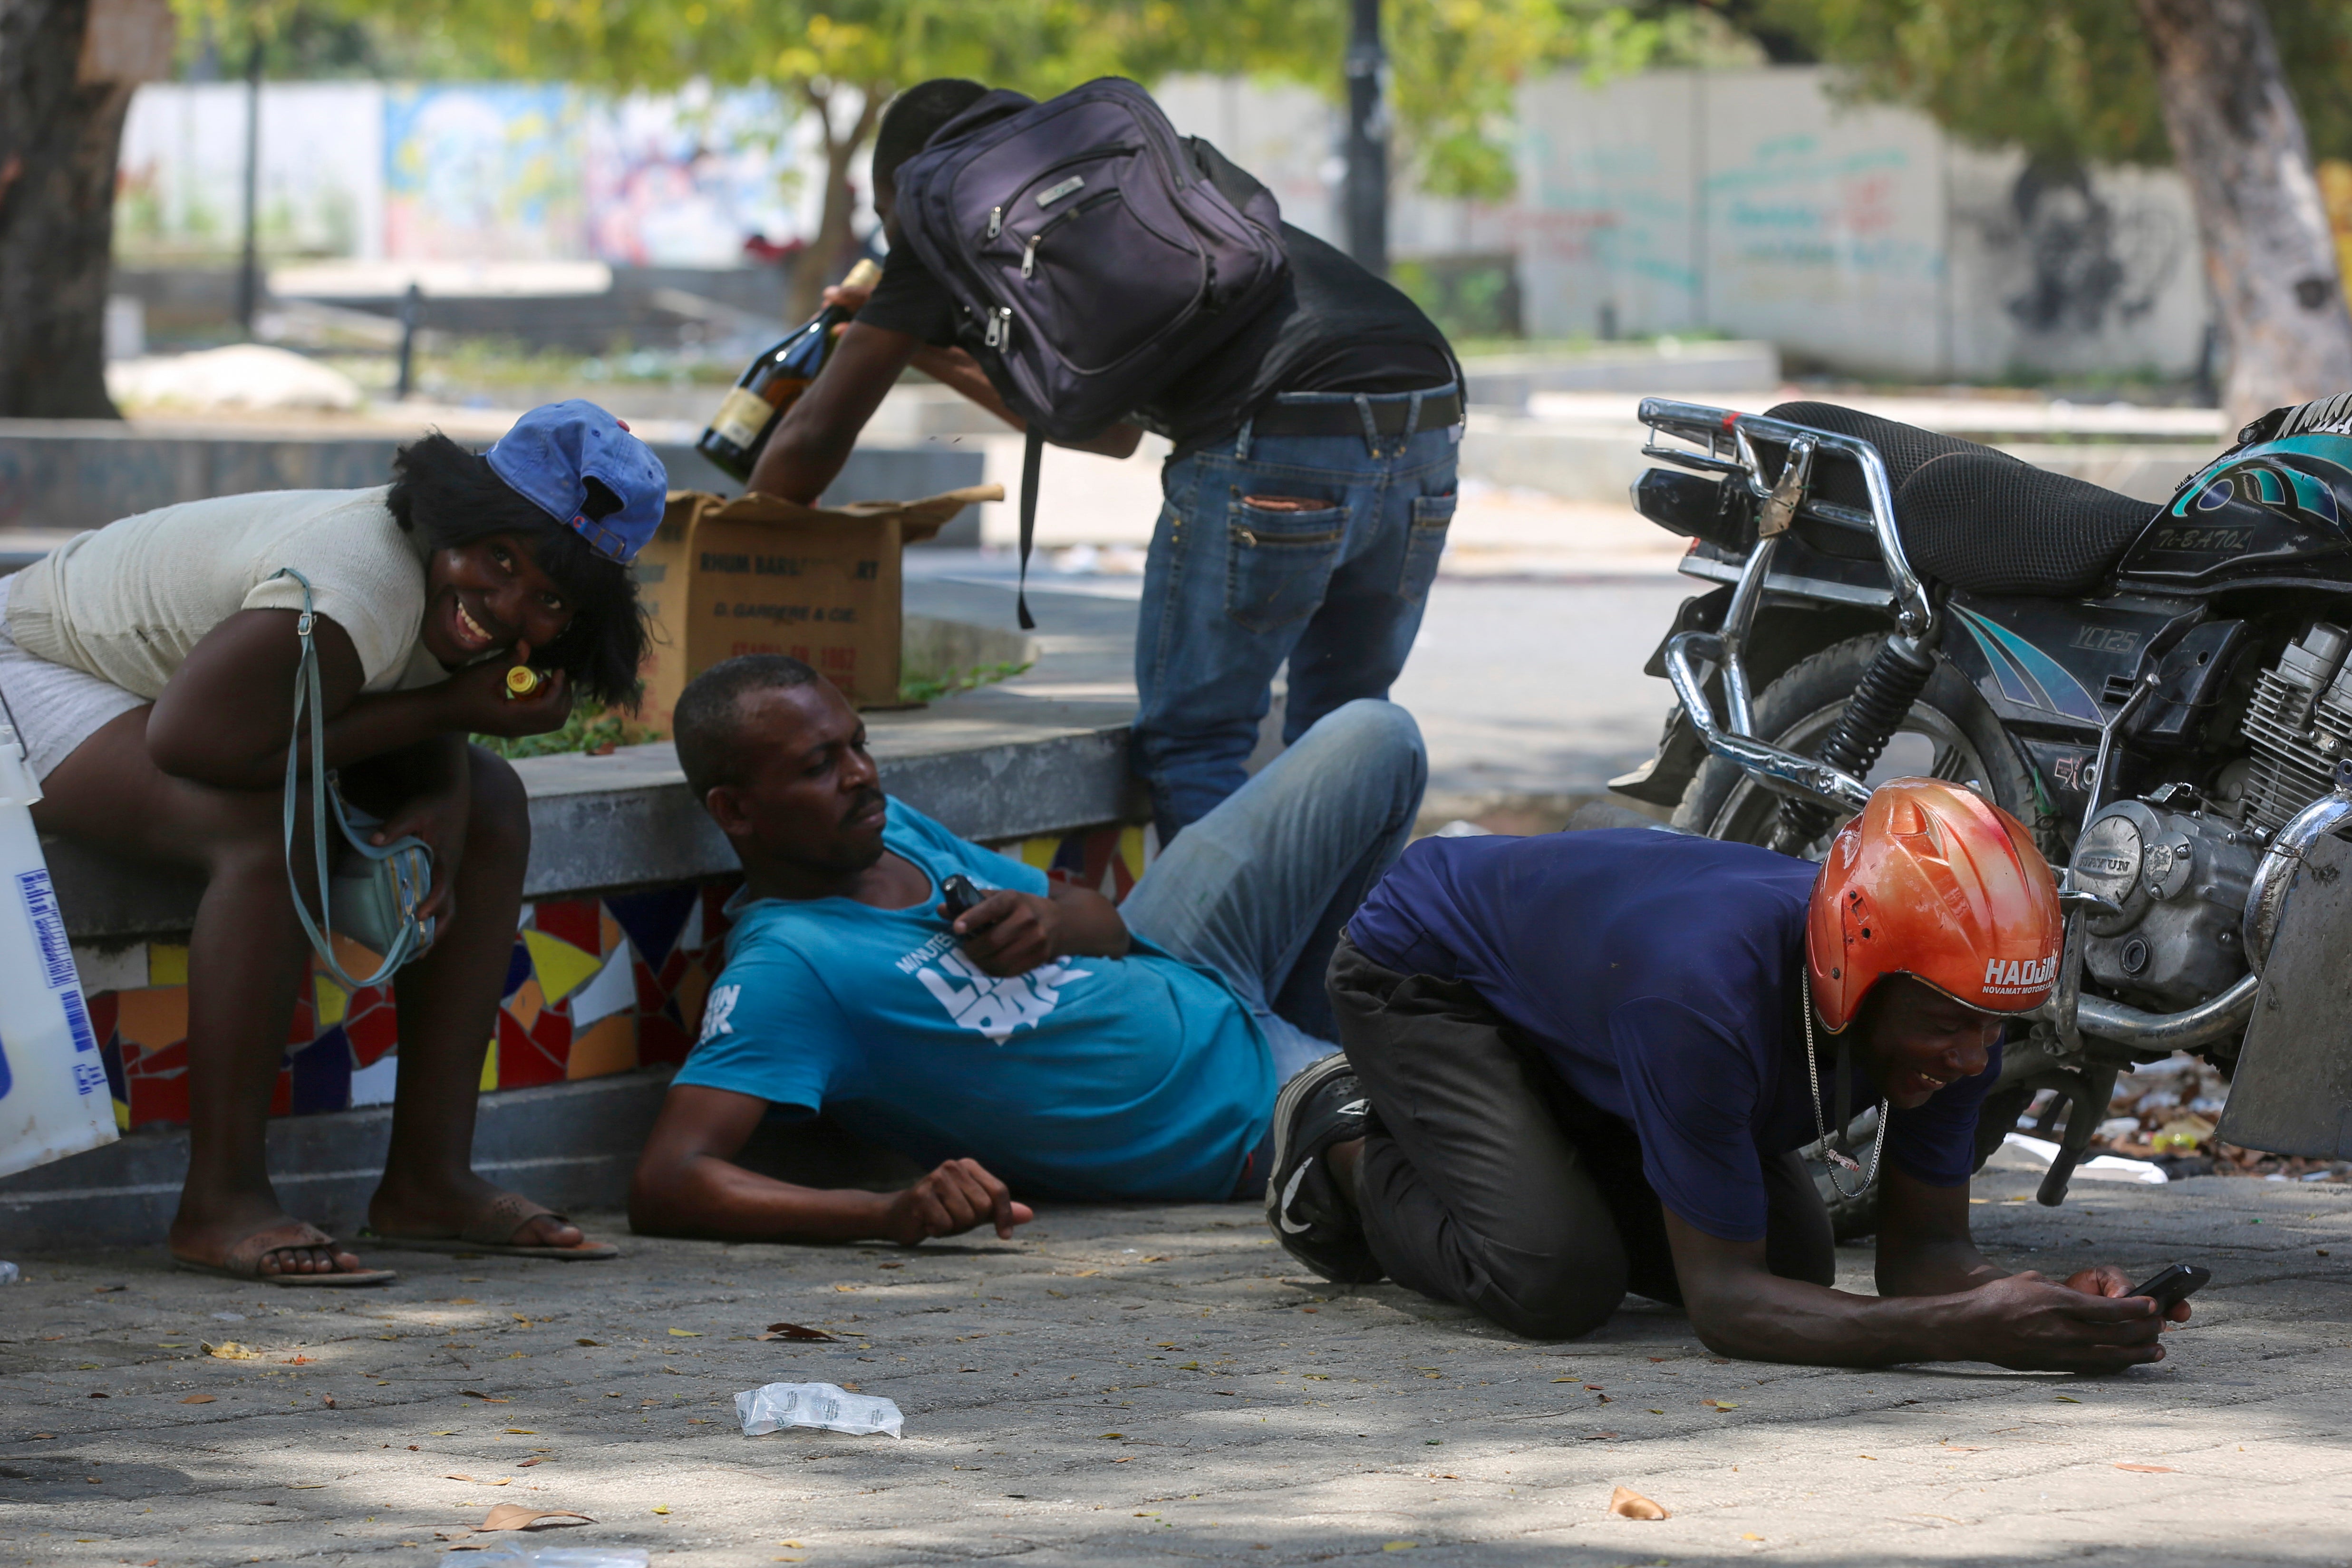 Haiti ViolencePeople take cover from gunfire during clashes between police and gangs in the Champs de Mars area